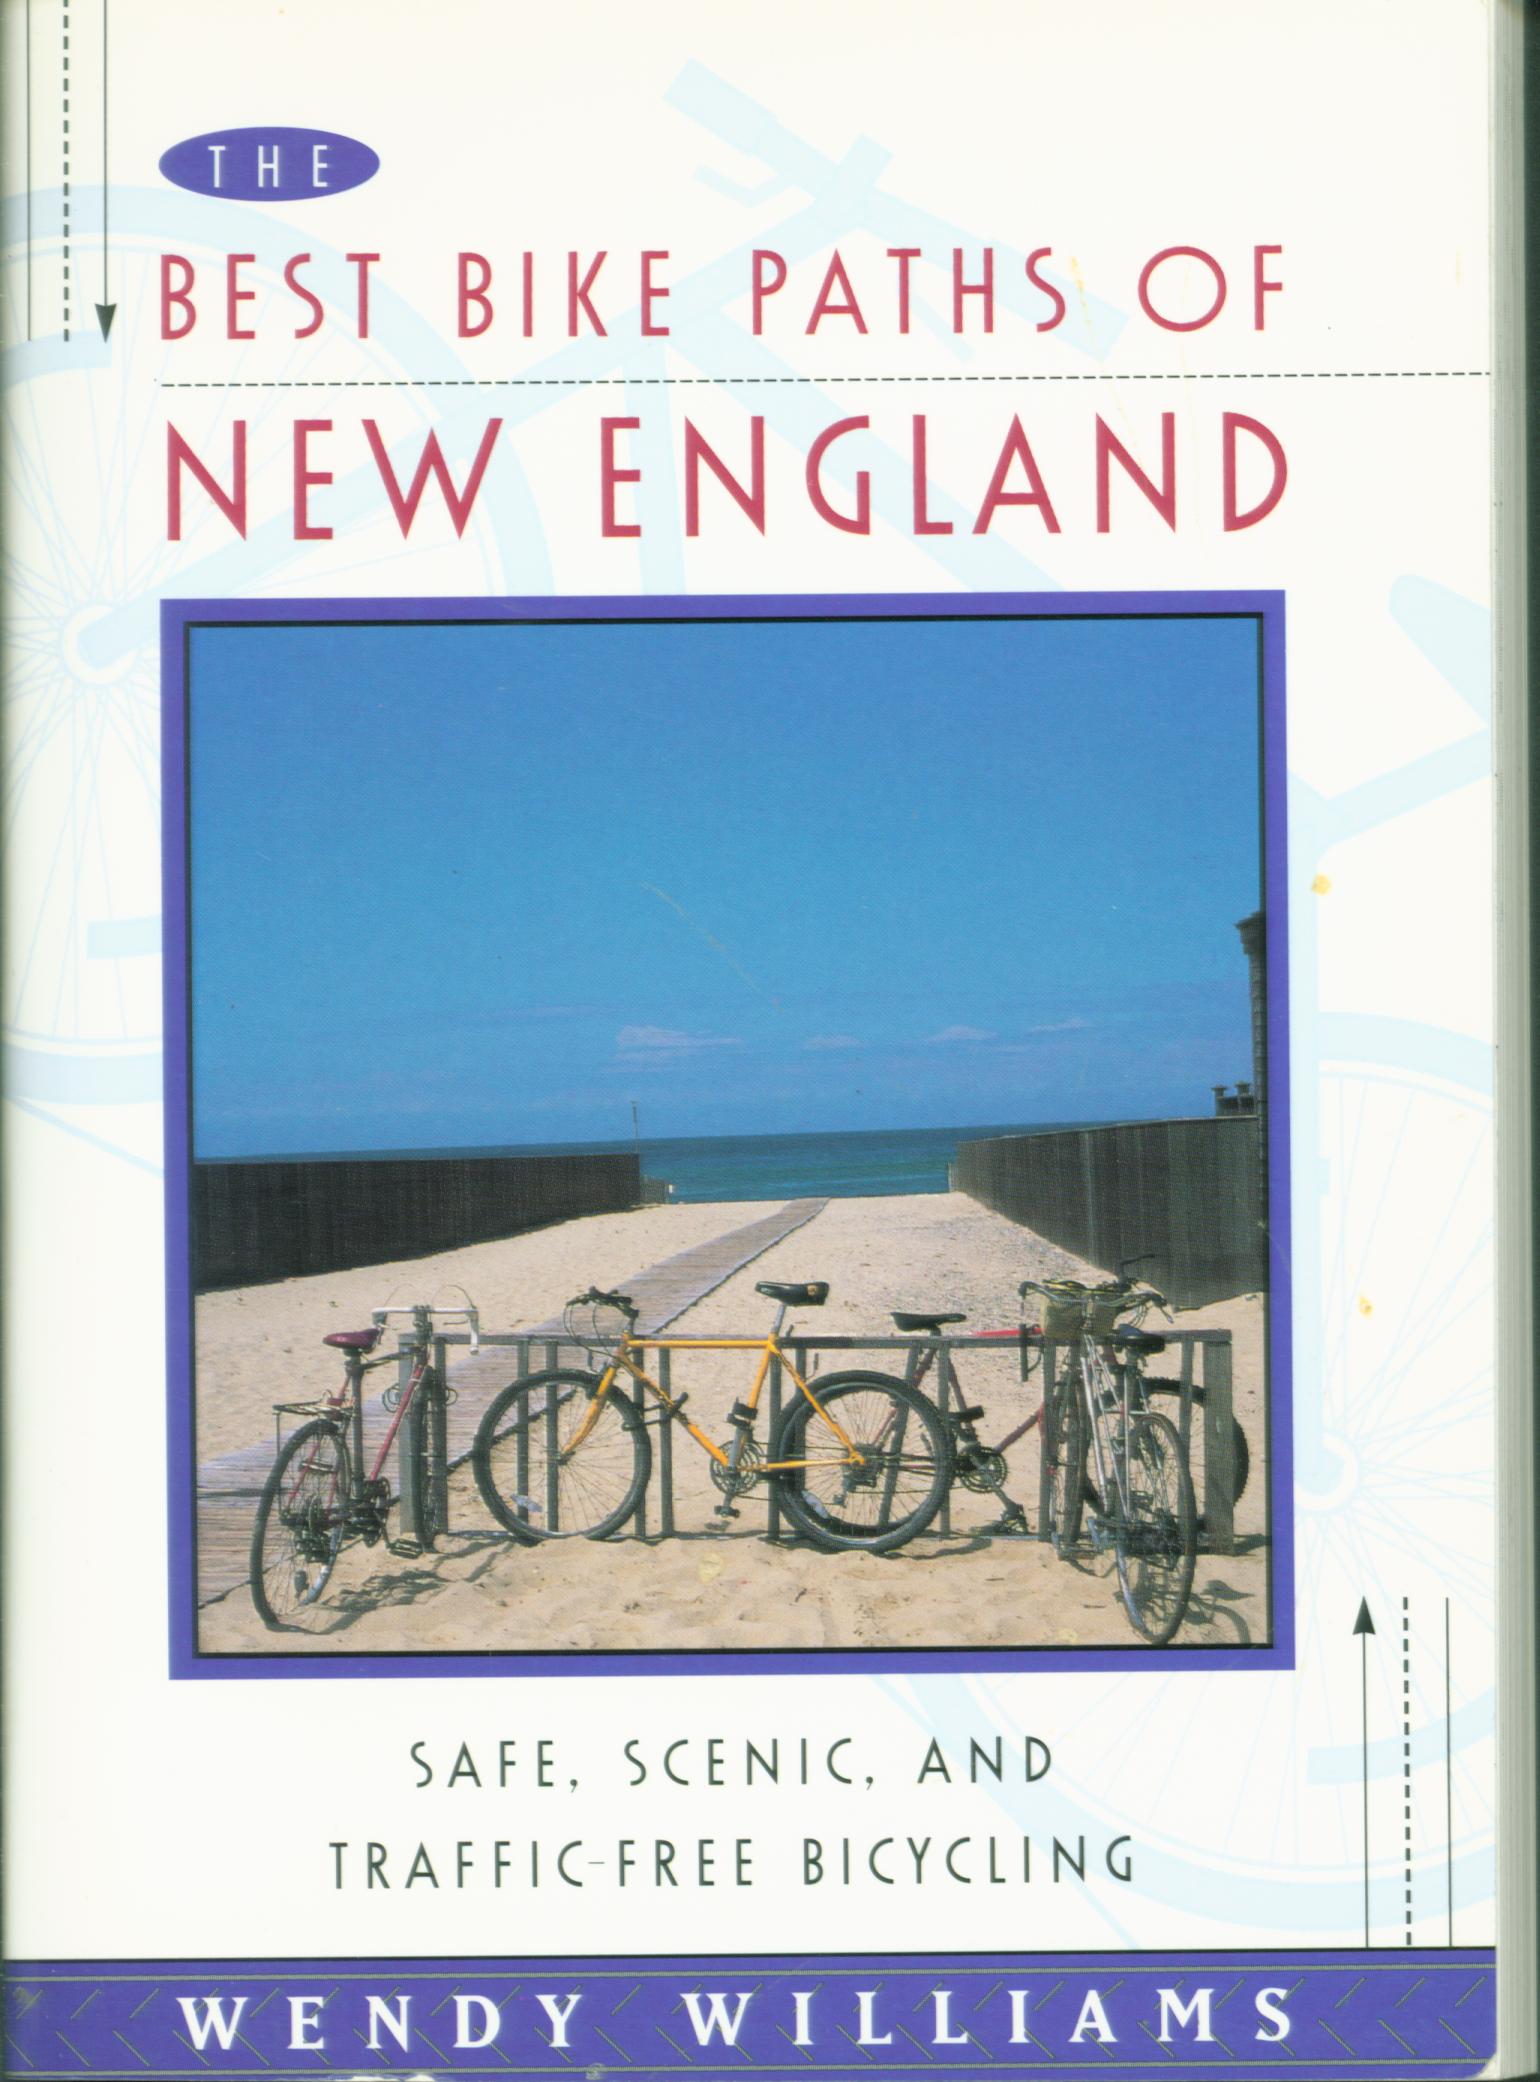 THE BEST BIKE PATHS OF NEW ENGLAND. 